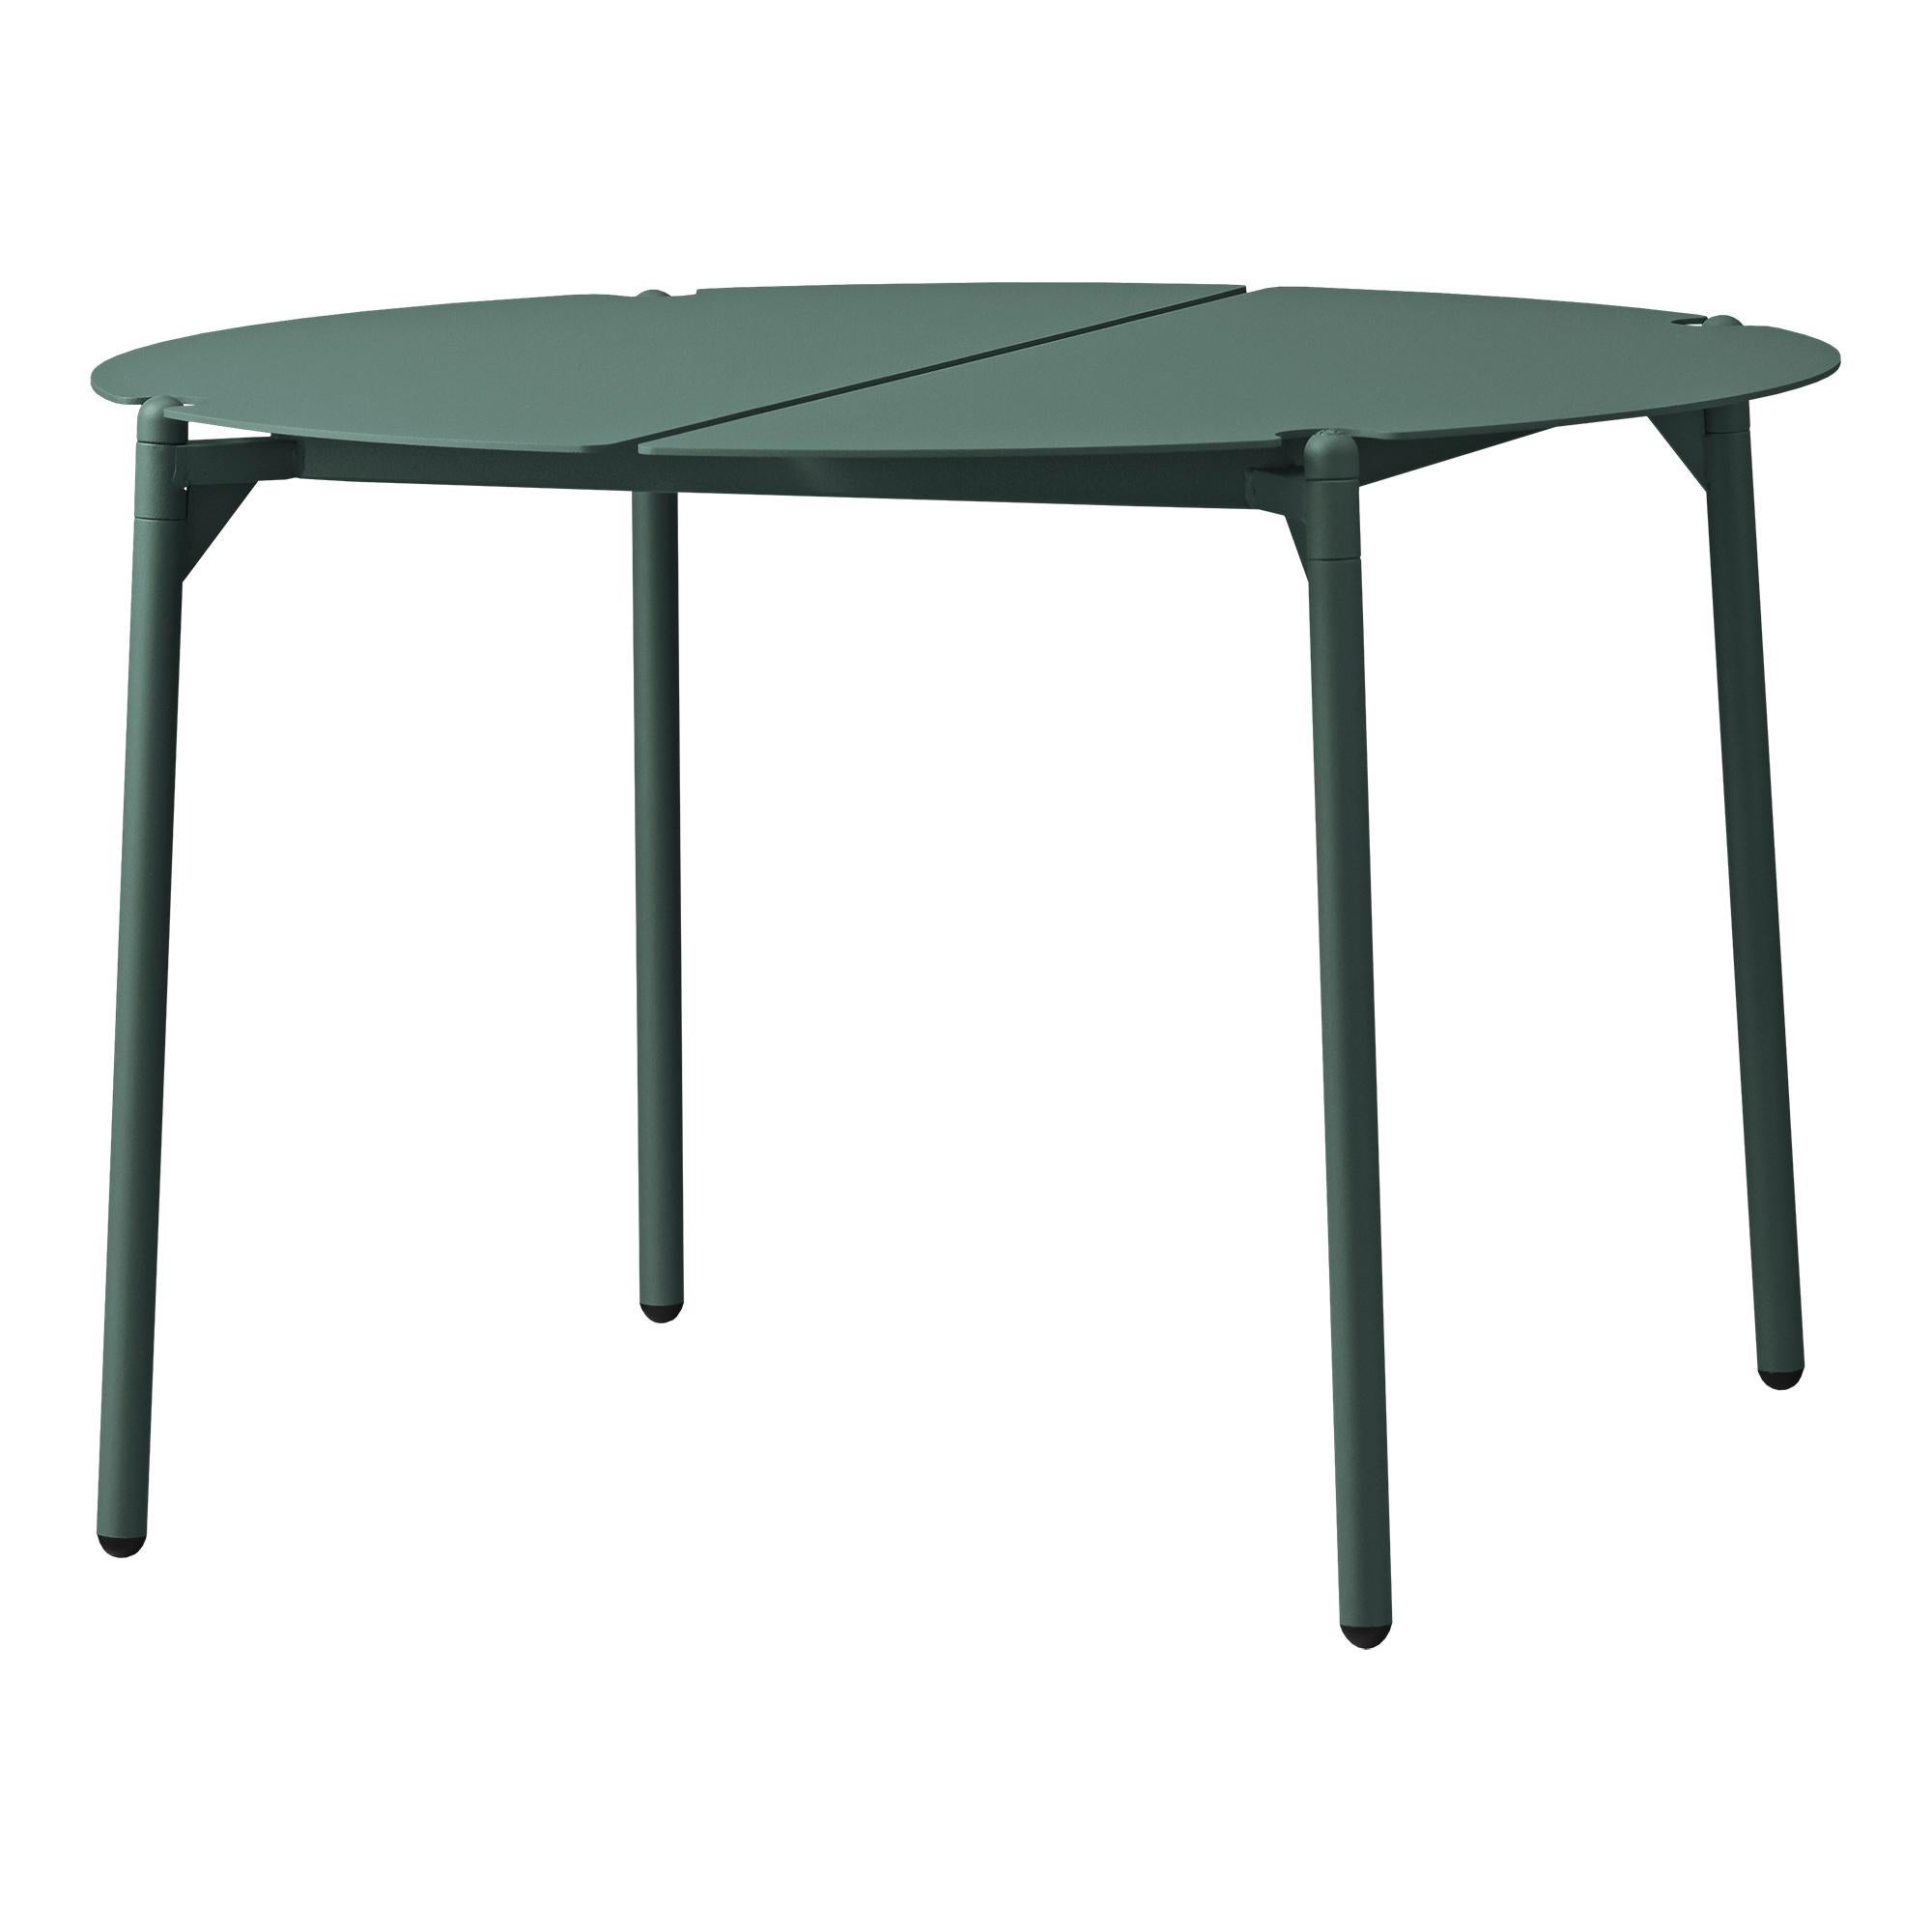 Large Forest Minimalist lounge table
Dimensions: Diameter 70 x H 45 cm 
Materials: Steel w. Matte Powder Coating & Aluminum w. Matte Powder Coating.
Available in colors: Taupe, Bordeaux, Forest, Ginger Bread, Black and, Black and Gold.

Place